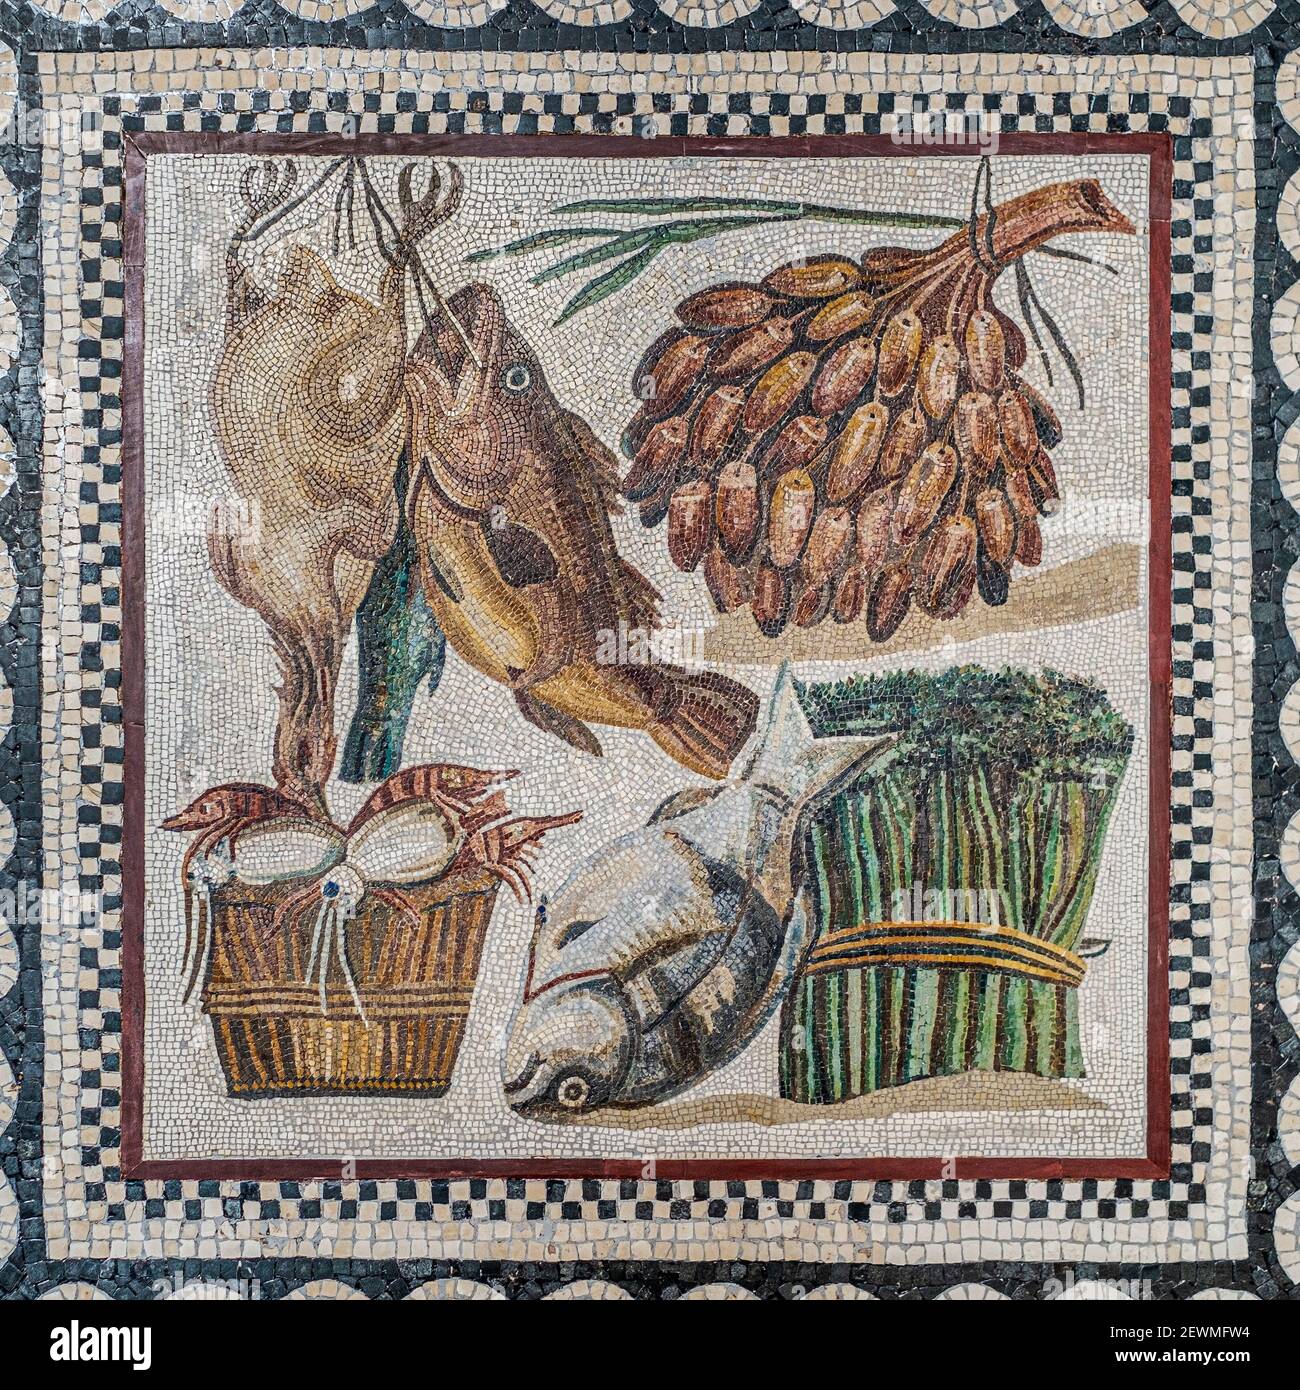 Ancient Roman Art, Fish and Vegetables Hanging Up in a Cupboard, still-life mosaic, 2nd century, From a villa at Tor Marancia, Vatican Museums, Rome. Stock Photo